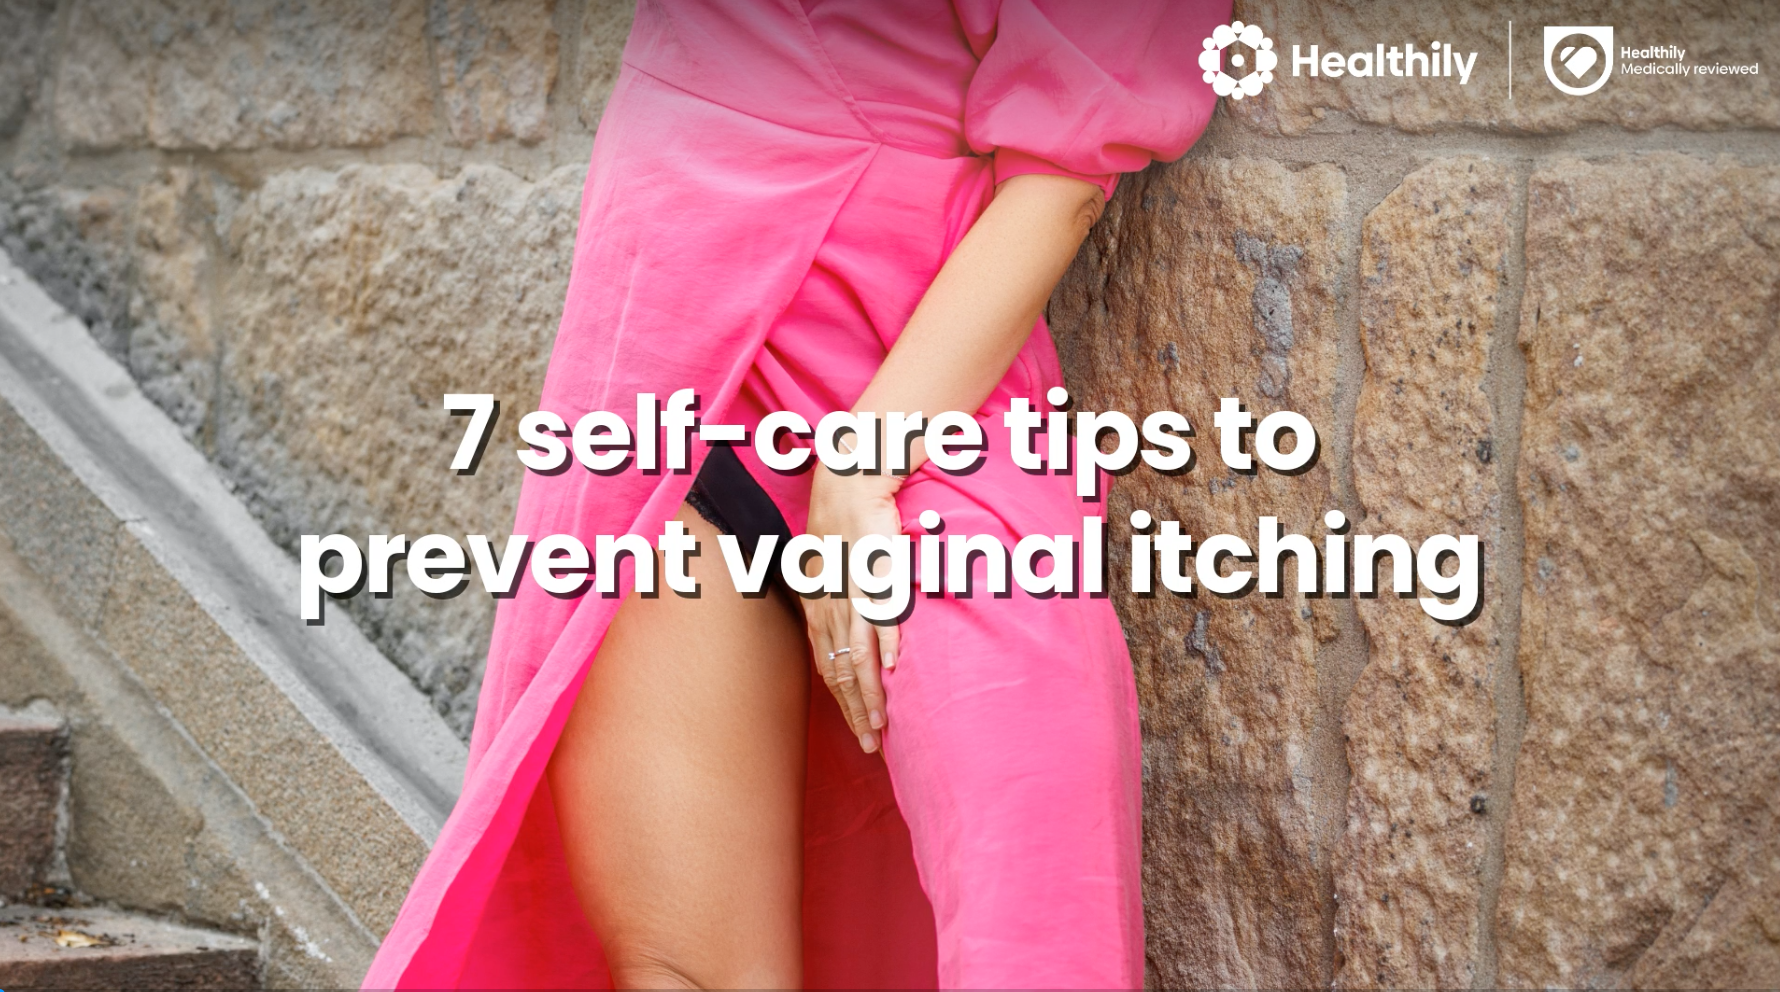 Vaginal itching home remedies to help stop and prevent it photo